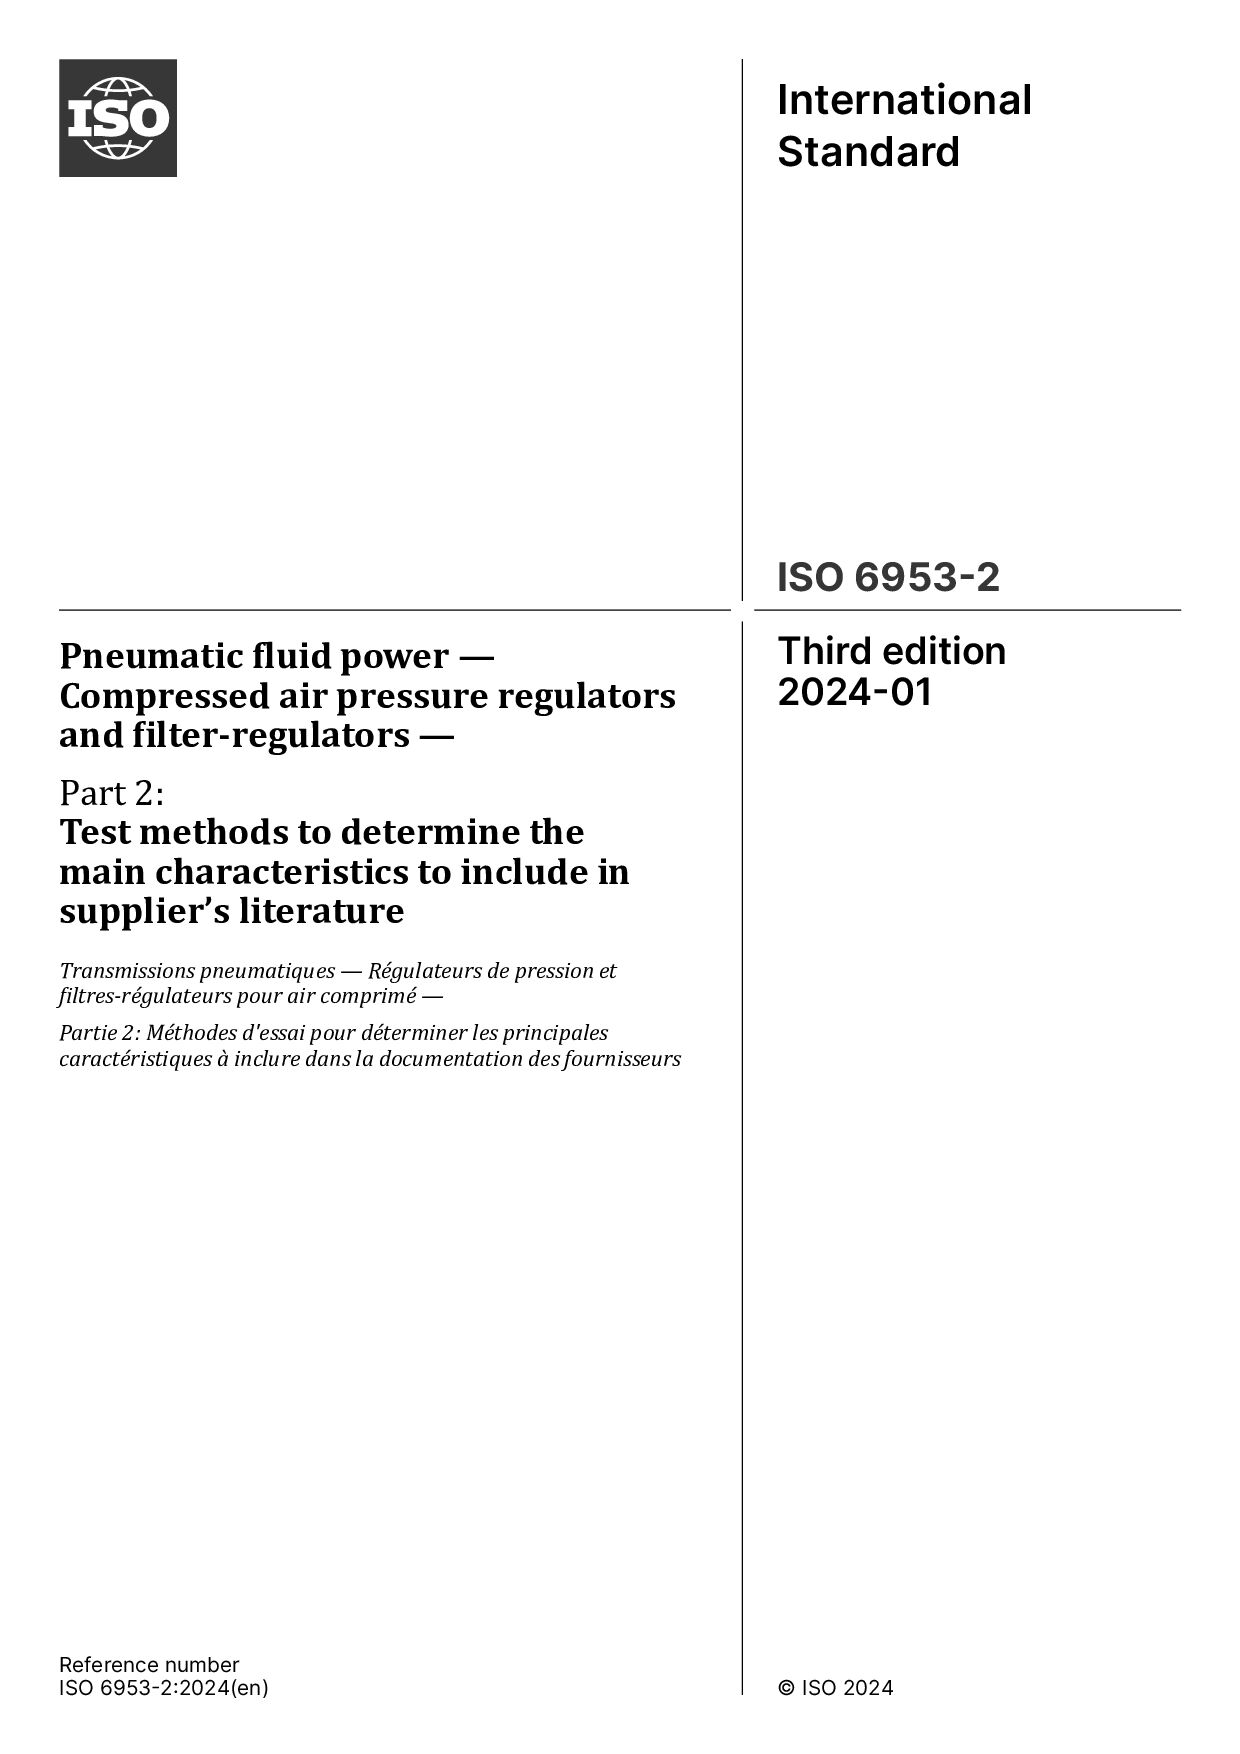 ISO 6953-2:2024